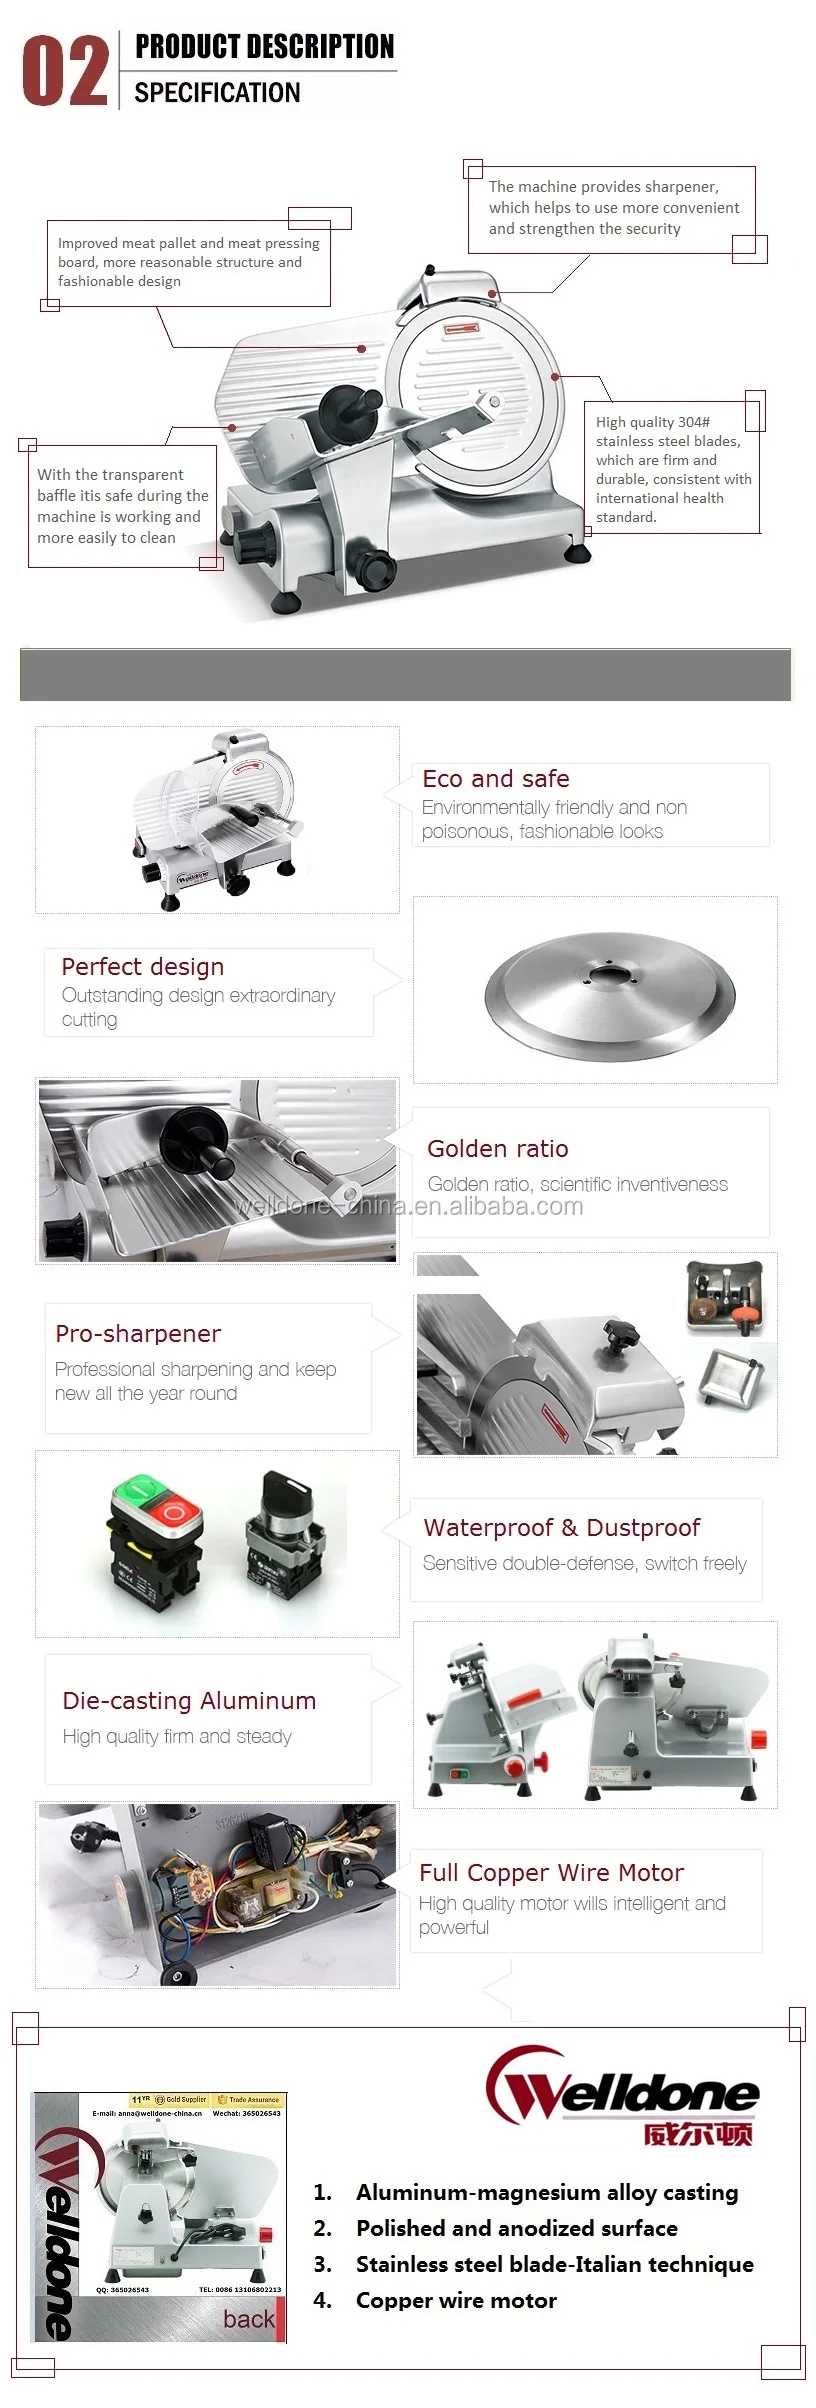 Welldone Hot Sale Wed 300a1 Meat Slicer Frozen Meat Slicer Automatic Meat Slicer View Meat Slicer Welldone Product Details From Foshan Shunde Welldone Machine Equipment Co Ltd On Alibaba Com